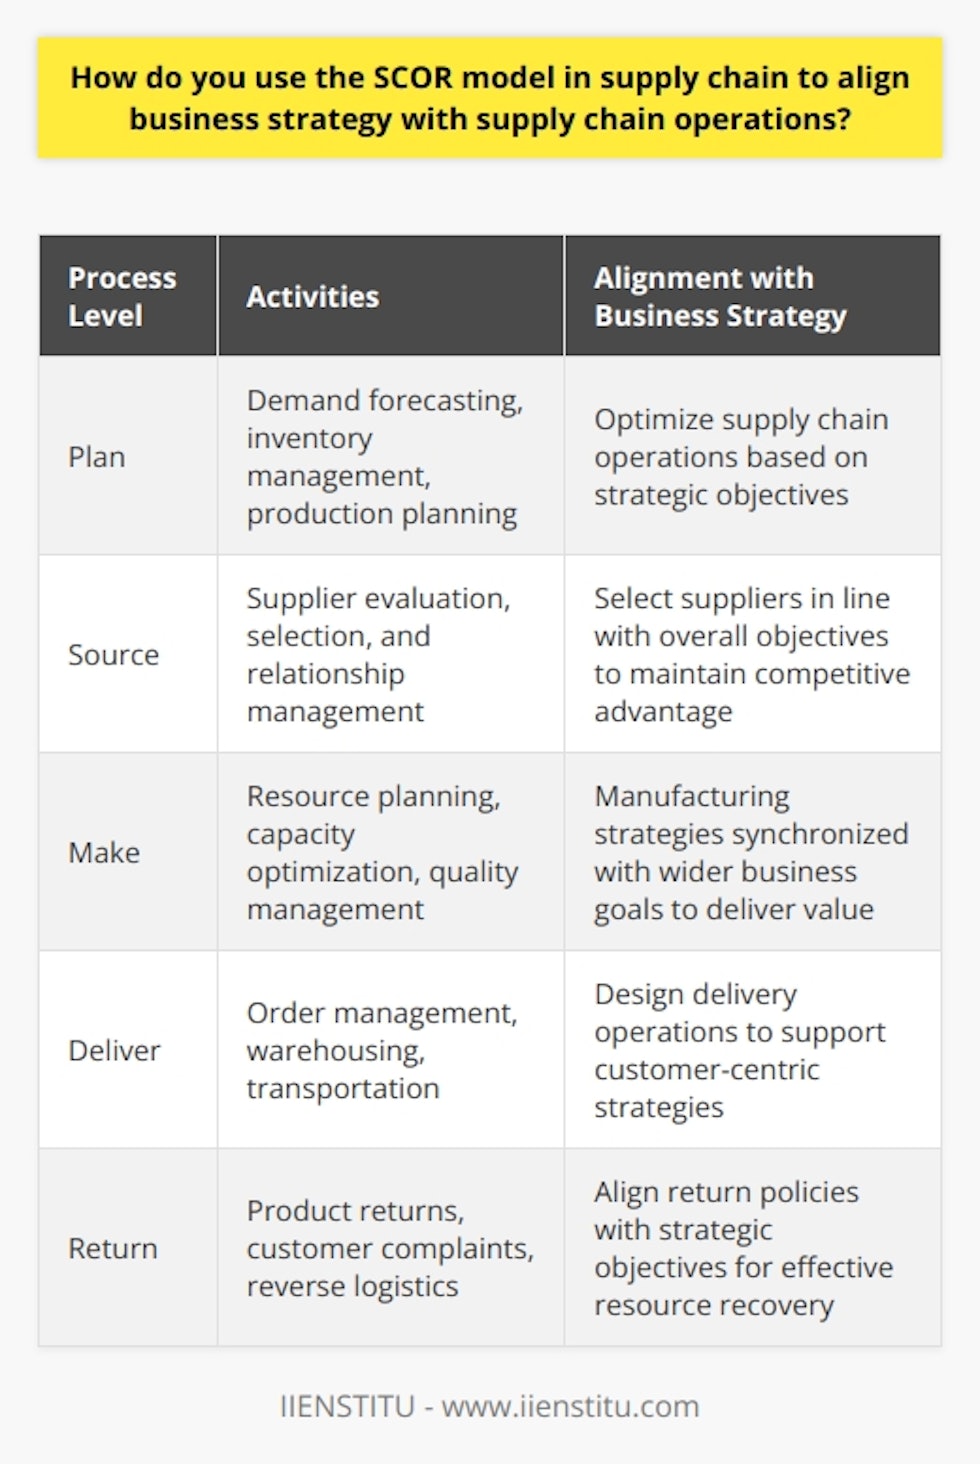 The SCOR model, or Supply Chain Operations Reference model, is a valuable tool for aligning business strategy with supply chain operations. It consists of five process levels, including Plan, Source, Make, Deliver, and Return, which help companies identify the most effective supply chain design to support their strategic goals.In the Plan stage, companies develop a comprehensive supply chain strategy and set performance targets. This involves activities such as demand forecasting, inventory management, and production planning. By aligning these processes with the organization's strategic objectives, companies can optimize their supply chain operations.During the Source stage, companies evaluate and select suppliers based on factors such as cost, quality, and lead time. Supplier relationship management is crucial in ensuring a reliable and efficient supply chain. Sourcing decisions should be in line with the company's overall objectives to maintain a competitive advantage.The Make stage encompasses production processes, from raw materials to finished goods. Effective resource planning, capacity optimization, and quality management play a critical role in meeting demand and achieving operational excellence. Manufacturing strategies should be synchronized with the organization's wider business goals to deliver value to customers.The Deliver stage focuses on order management, warehousing, and transportation aspects of the supply chain. Efficient logistics processes contribute to reduced costs, improved delivery performance, and increased customer satisfaction. Delivery operations should be designed to support customer-centric strategies, such as shorter lead times and superior product availability.In the Return stage, organizations manage product returns, handle customer complaints, and implement corrective actions to prevent recurring issues. Streamlining the reverse logistics process enables improved sustainability and customer loyalty. Companies must align their return policies with their strategic objectives to ensure effective resource recovery and minimize environmental impact.Continuous improvement and performance measurement are also crucial in the SCOR model. Organizations should regularly review key performance indicators (KPIs) and compare them to industry benchmarks. This allows companies to identify areas for improvement and ensure that their supply chain operations remain aligned with their strategic goals.In conclusion, the SCOR model provides a systematic approach to designing and managing supply chain processes. By aligning these processes with the overall business strategy, companies can gain a competitive advantage, meet customer expectations, and achieve operational excellence.